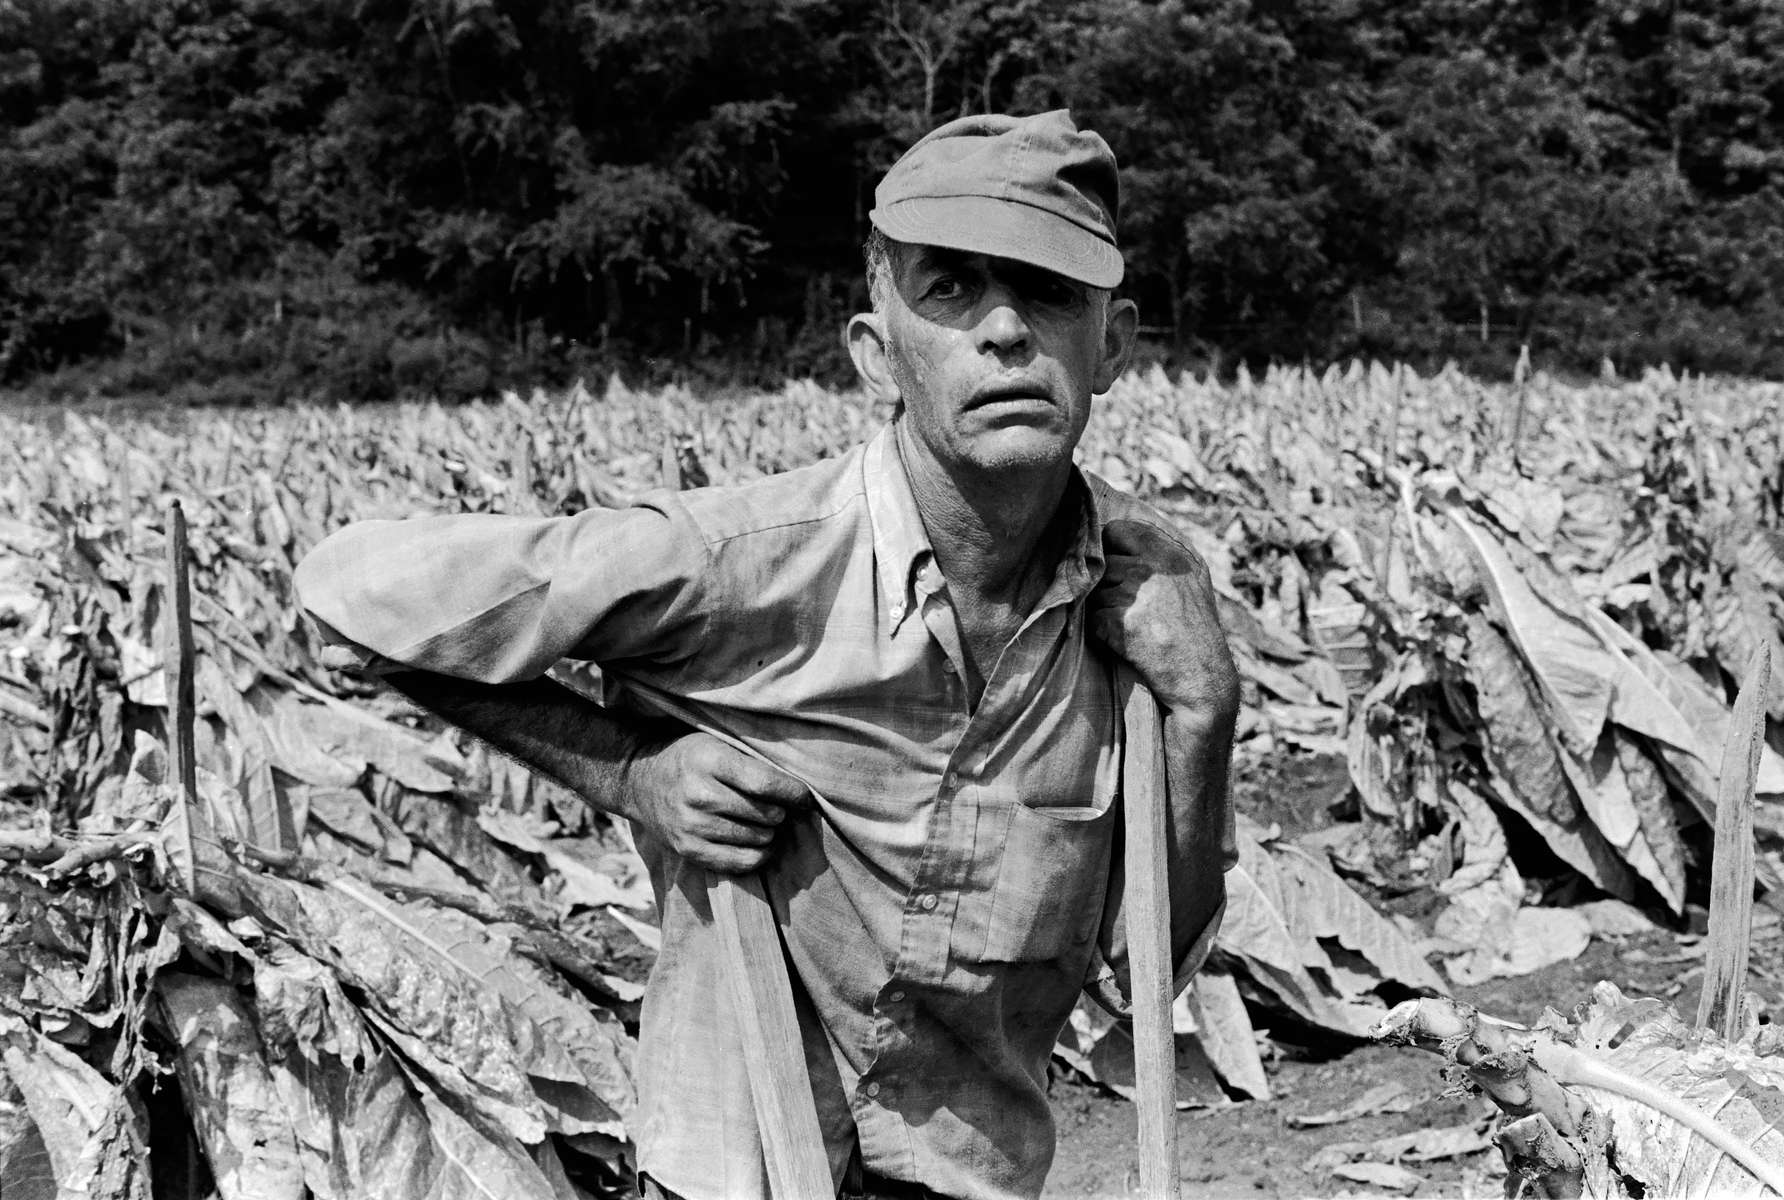 Hired hand in a tobacco field, Jackson, KY, 1978. The owners of this field klndly put up my traveling companion and myself for the night, after meeting us by a roadside flea market. Jackson is nestled in the heart of the Cumberland Plateau in the Appalachian Mountains. Kentucky produces more tobacco than any other state except North Carolina. For centuries, tobacco barns dotted the central Kentucky landscape, but as health risks from smoking became clear, sales of the state’s longtime top crop plummeted. Now farmers are turning to hemp as a less labor-intensive, more profitable alternative with a growing market for the extracted CBD oil. Jon Chase photo